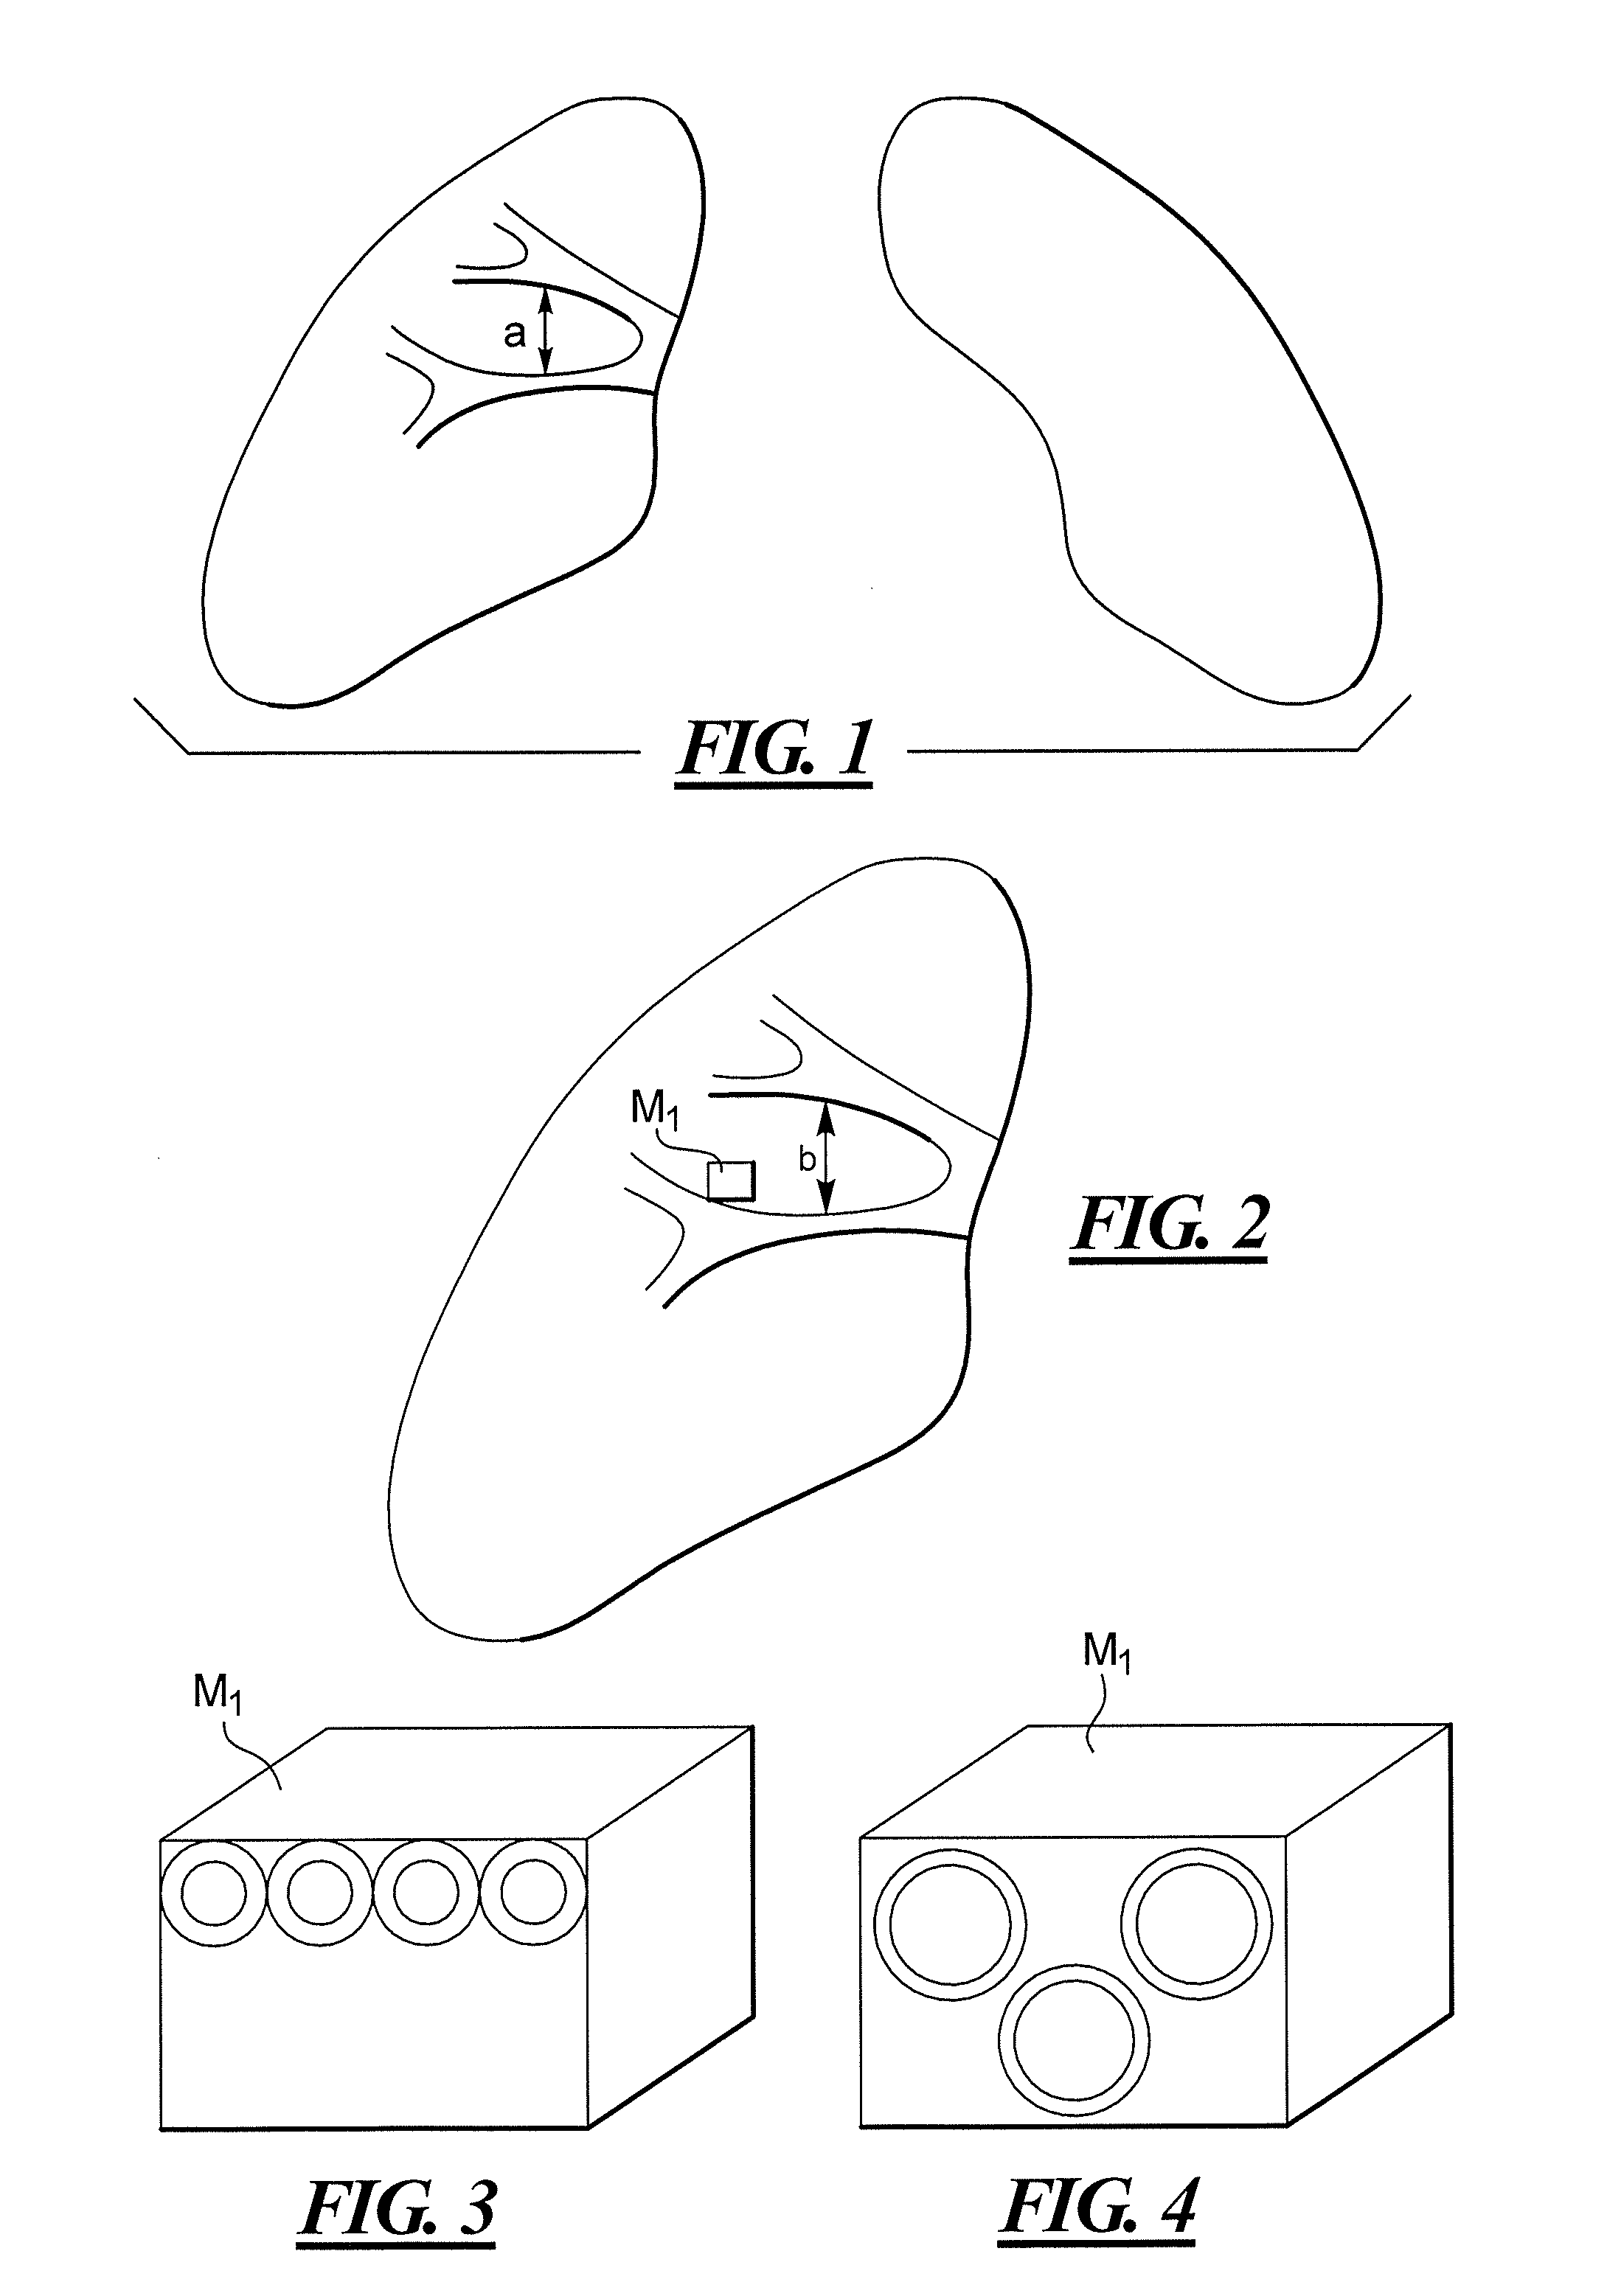 Method for diagnosis of functional lung illnesses